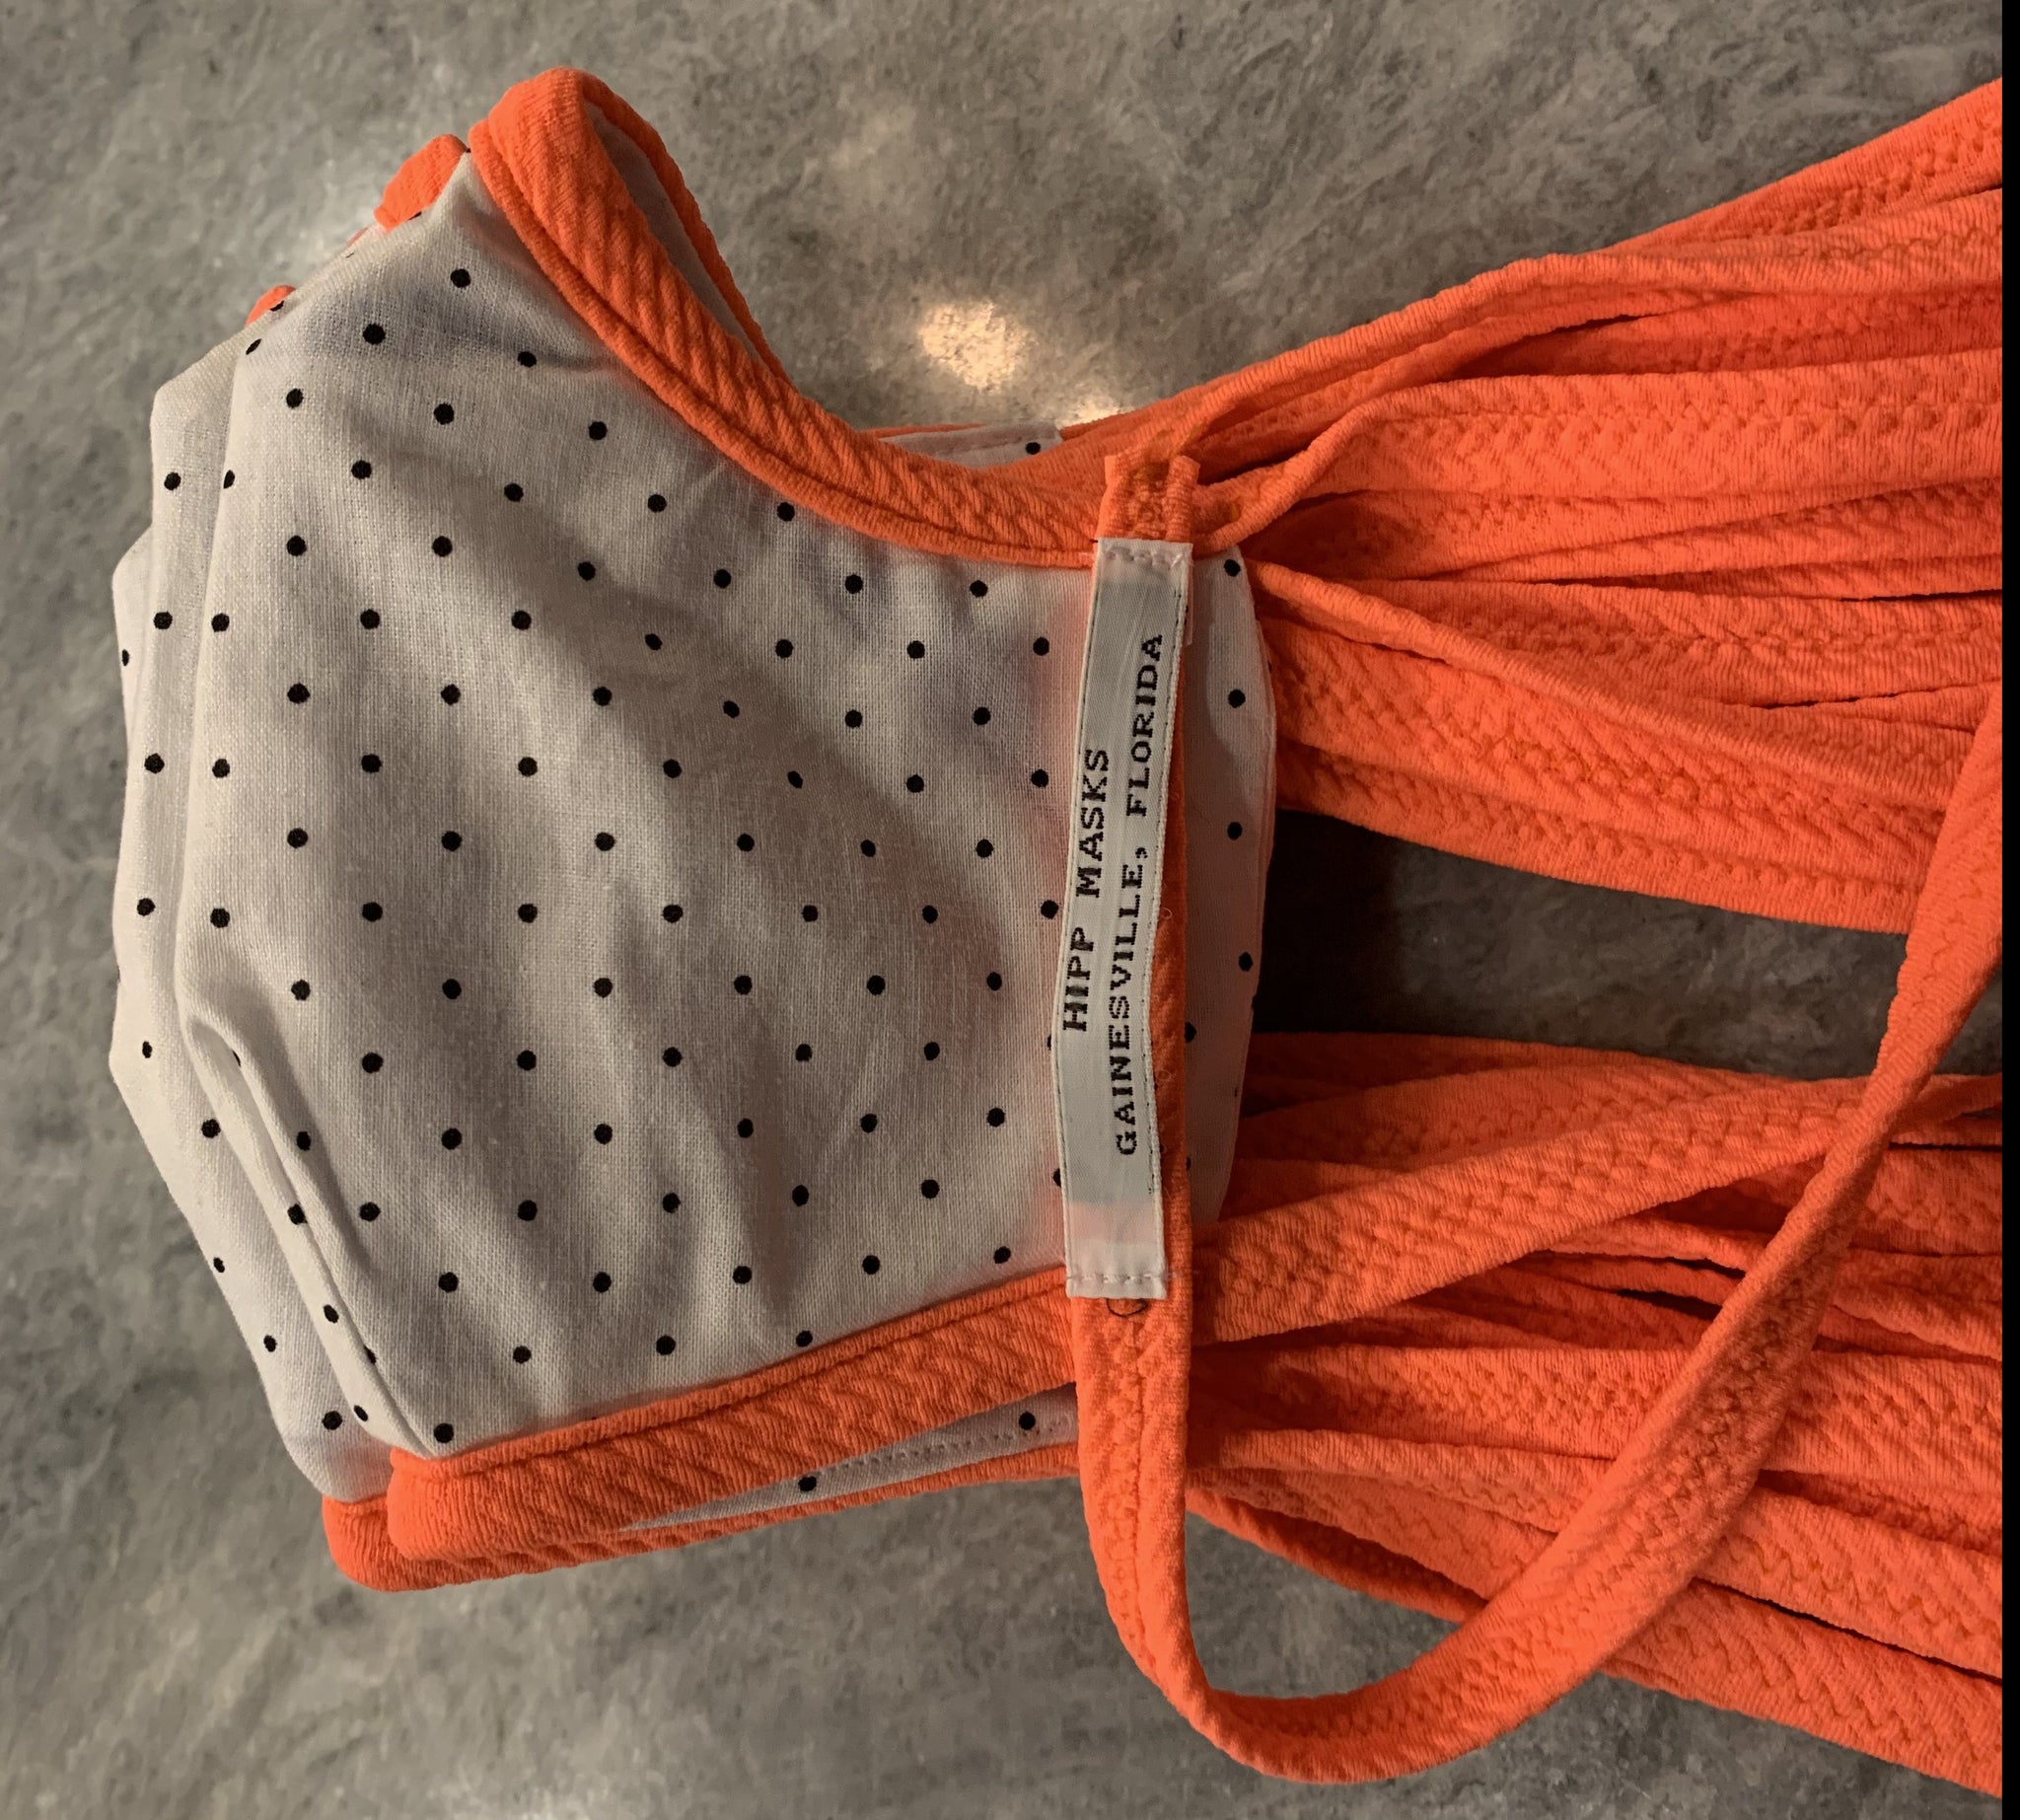 Depot Park: White with Black Polka Dots and Bright Orange Stretch Ties